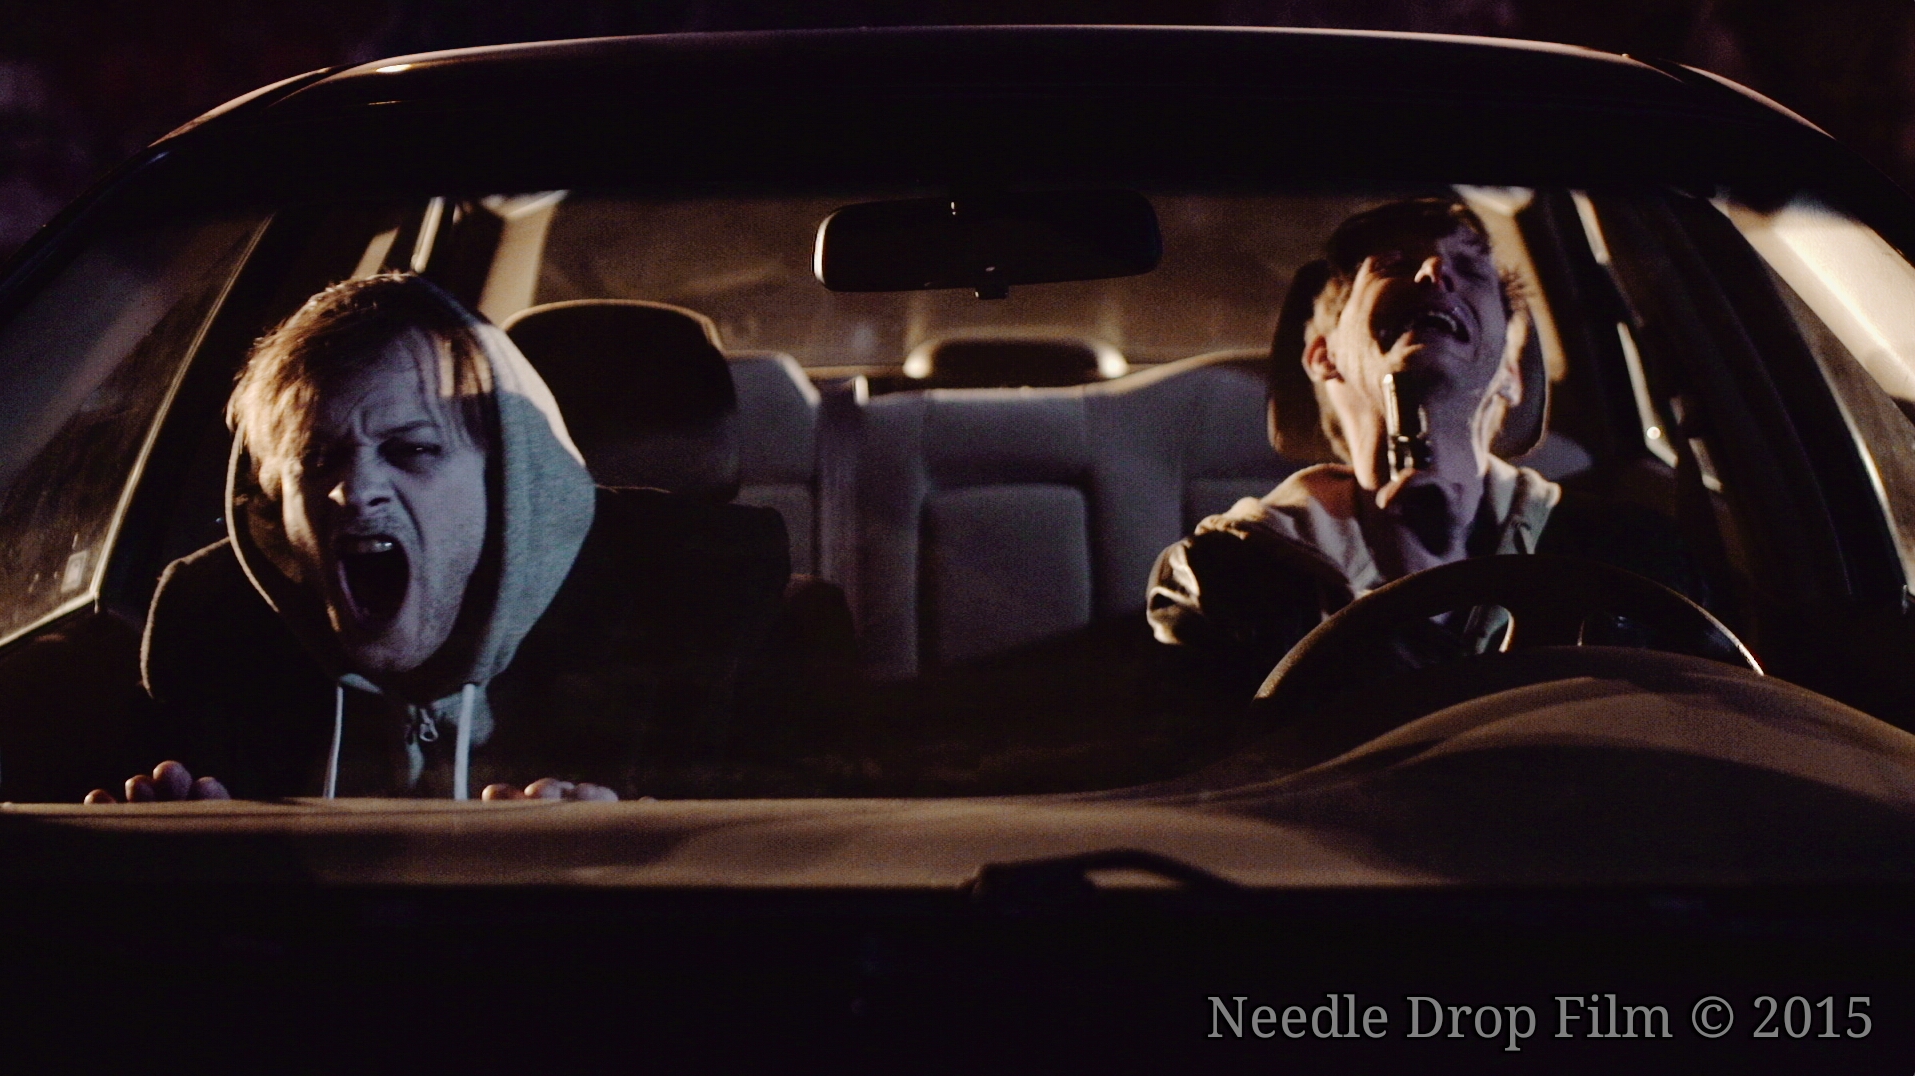 Christopher Tyson and Paul Burke in a very intense scene in a Needle Drop Film Production. (2015)